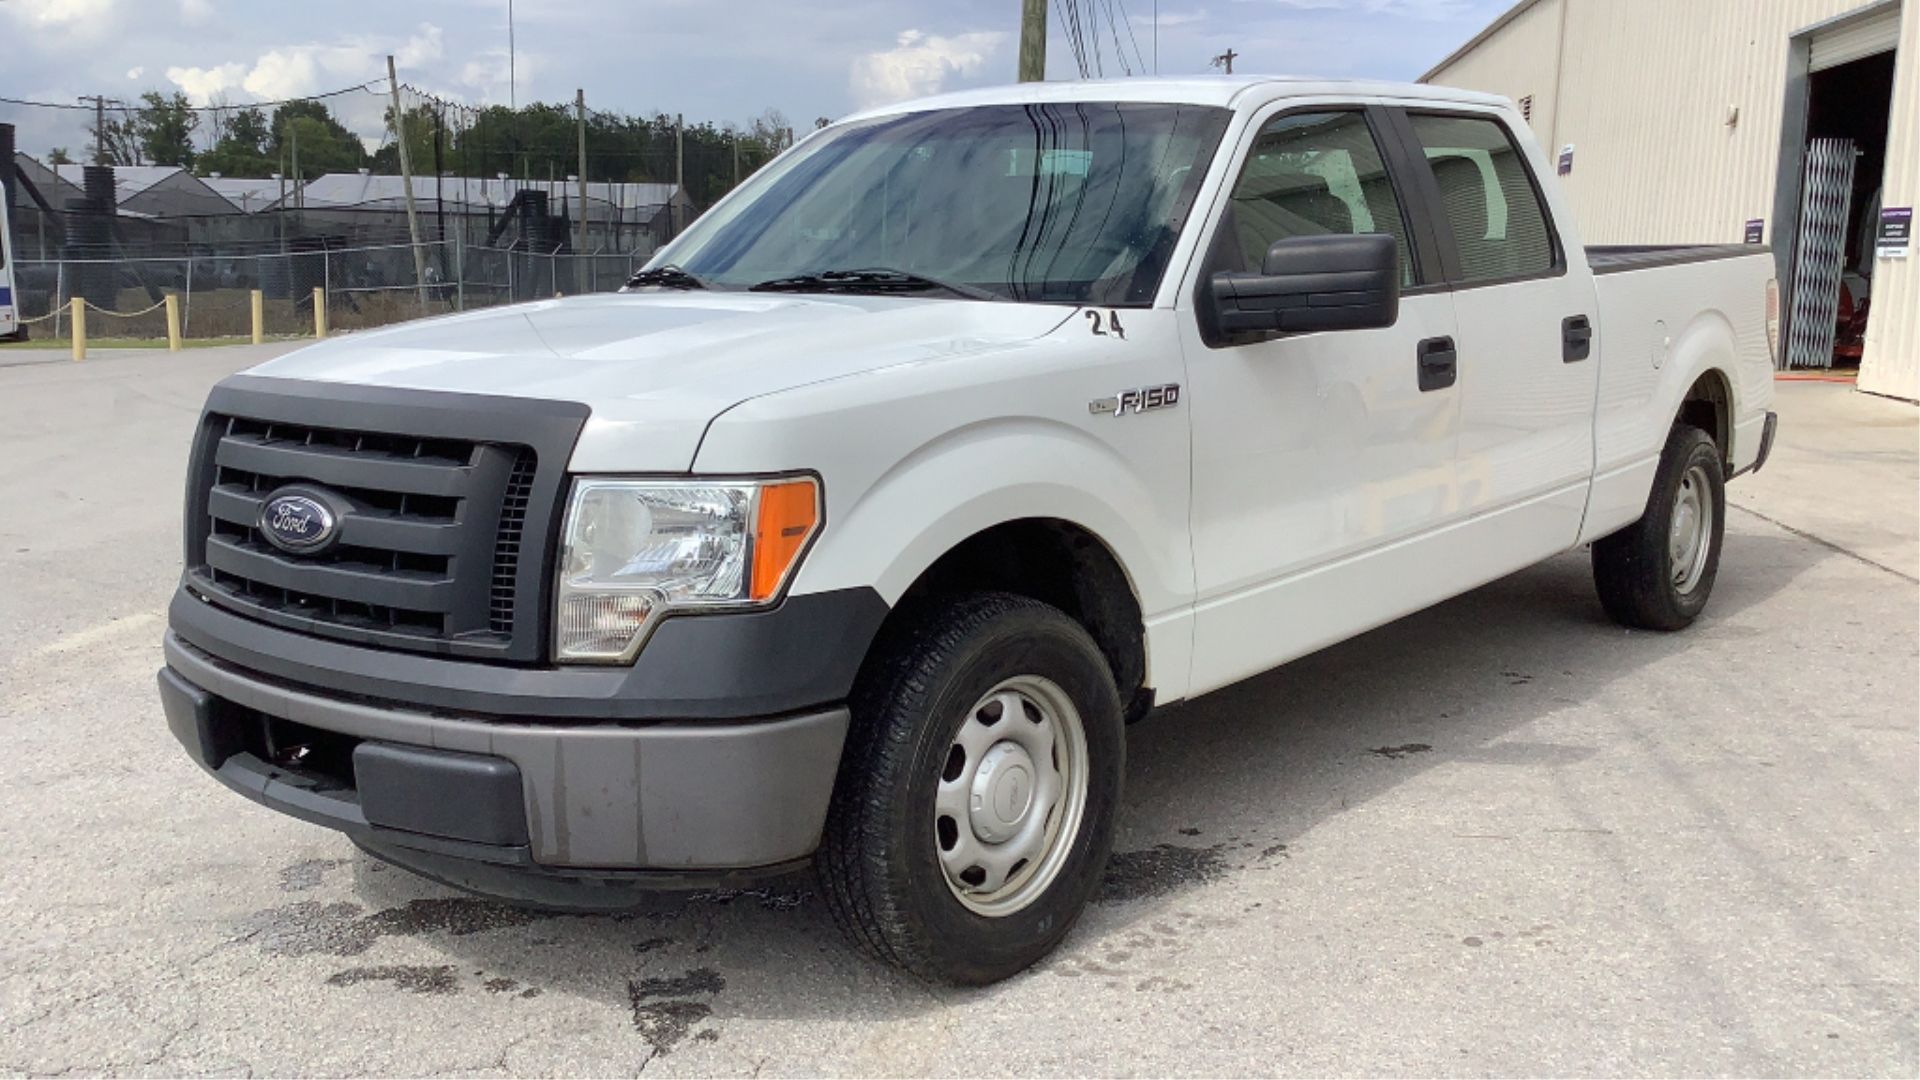 2012 Ford F150 XL Crew Cab 2WD - Image 10 of 86